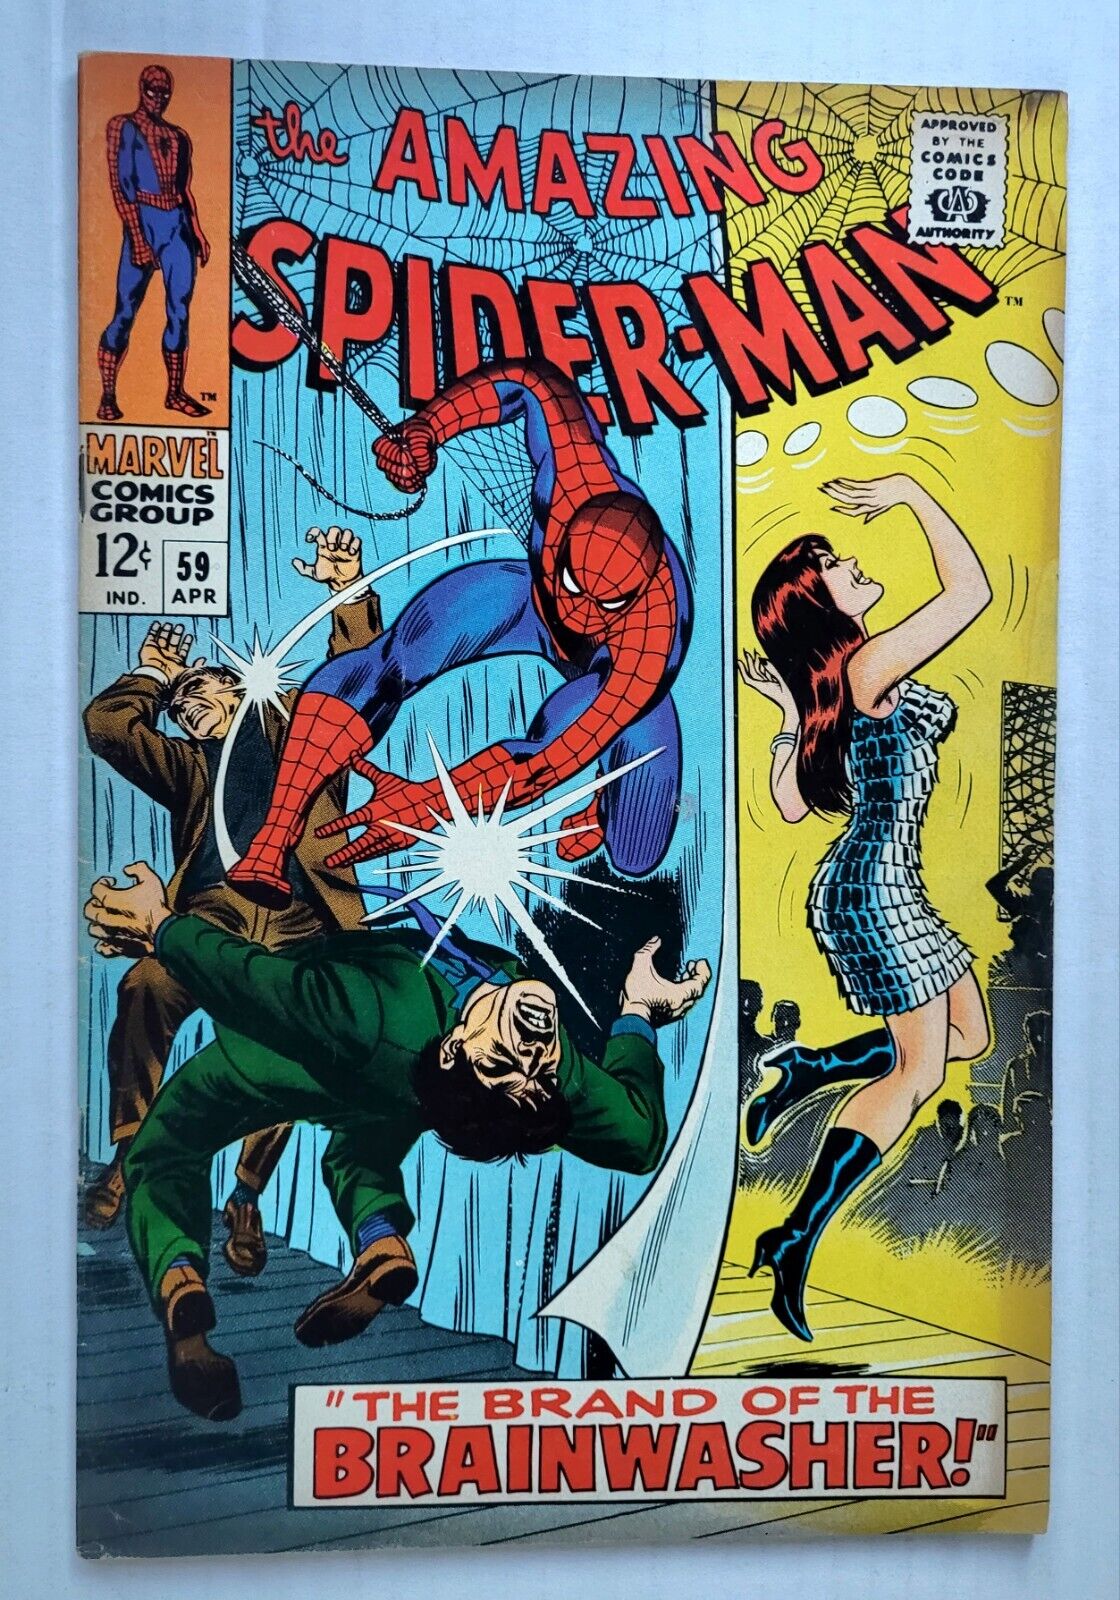 The Amazing Spider-Man #59 1968 Marvel Comics 1st Mary Jane Watson On Cover